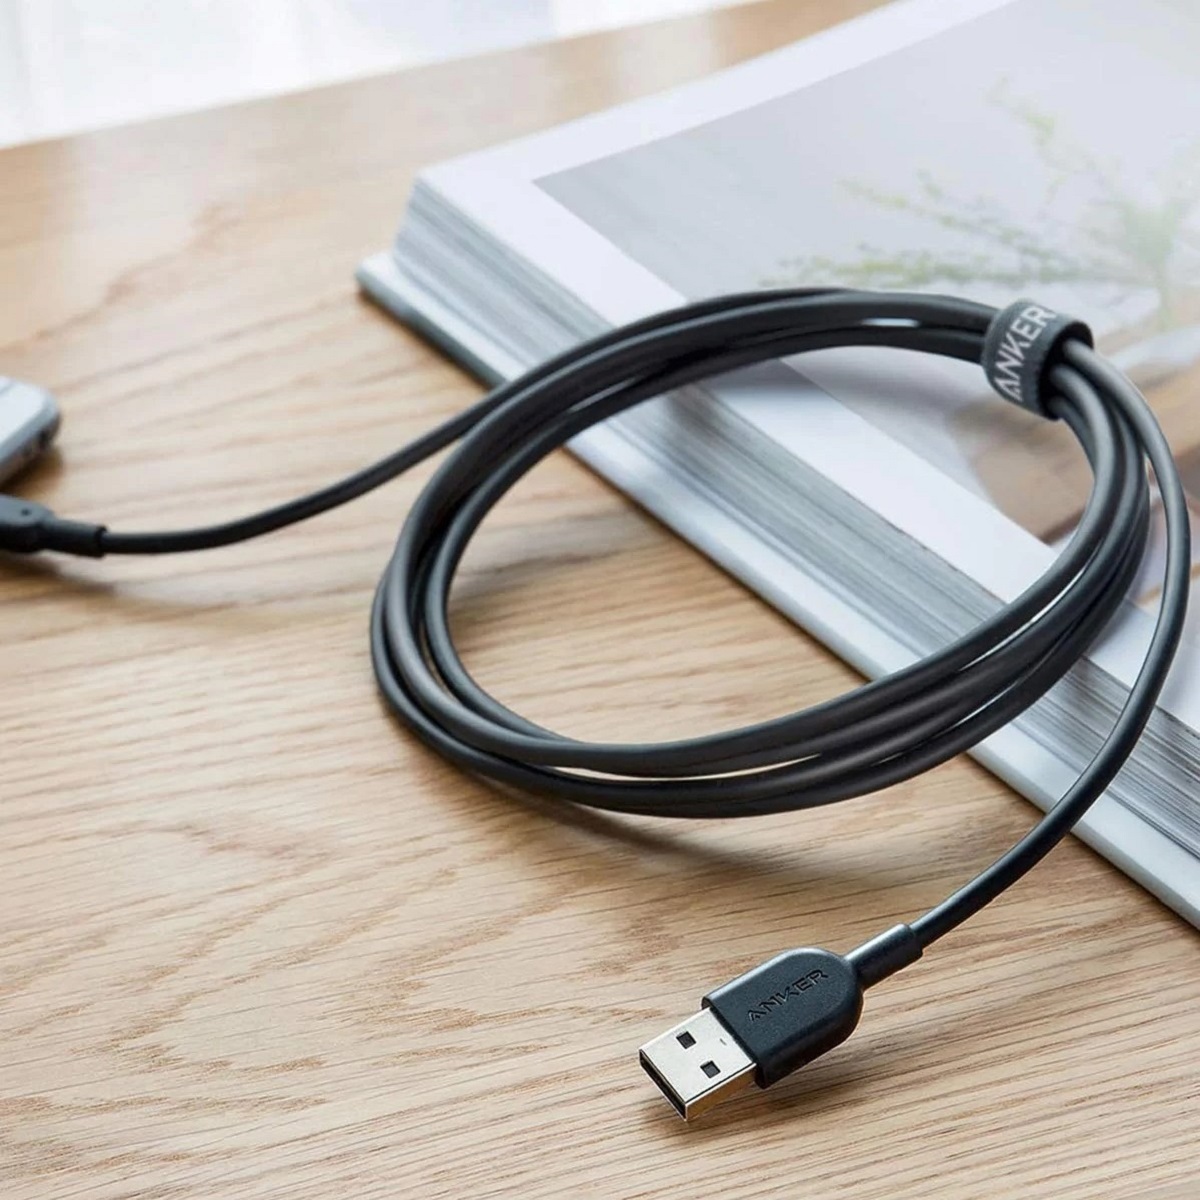 Anker cables